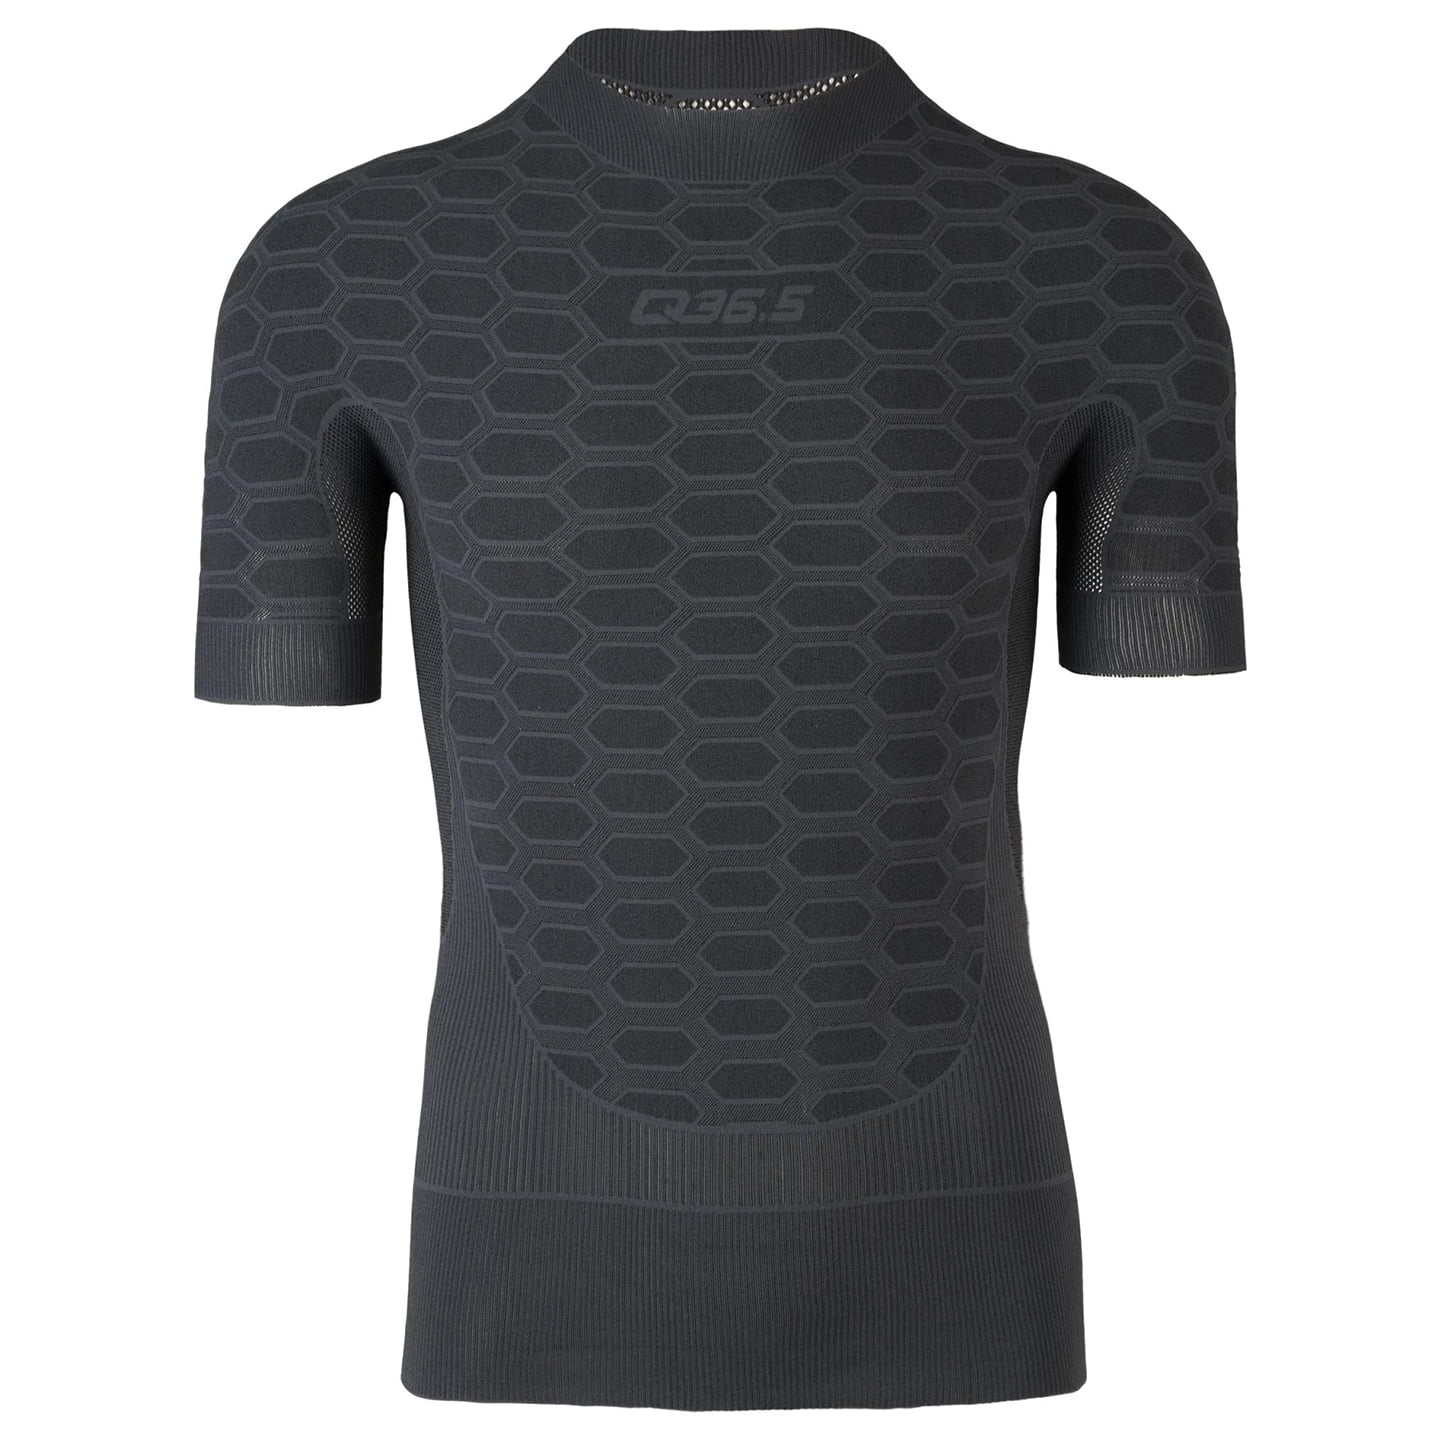 Q36.5 Cycling Layer 2 Base Layer, for men, size S-M, Undershirt, Cycle wear